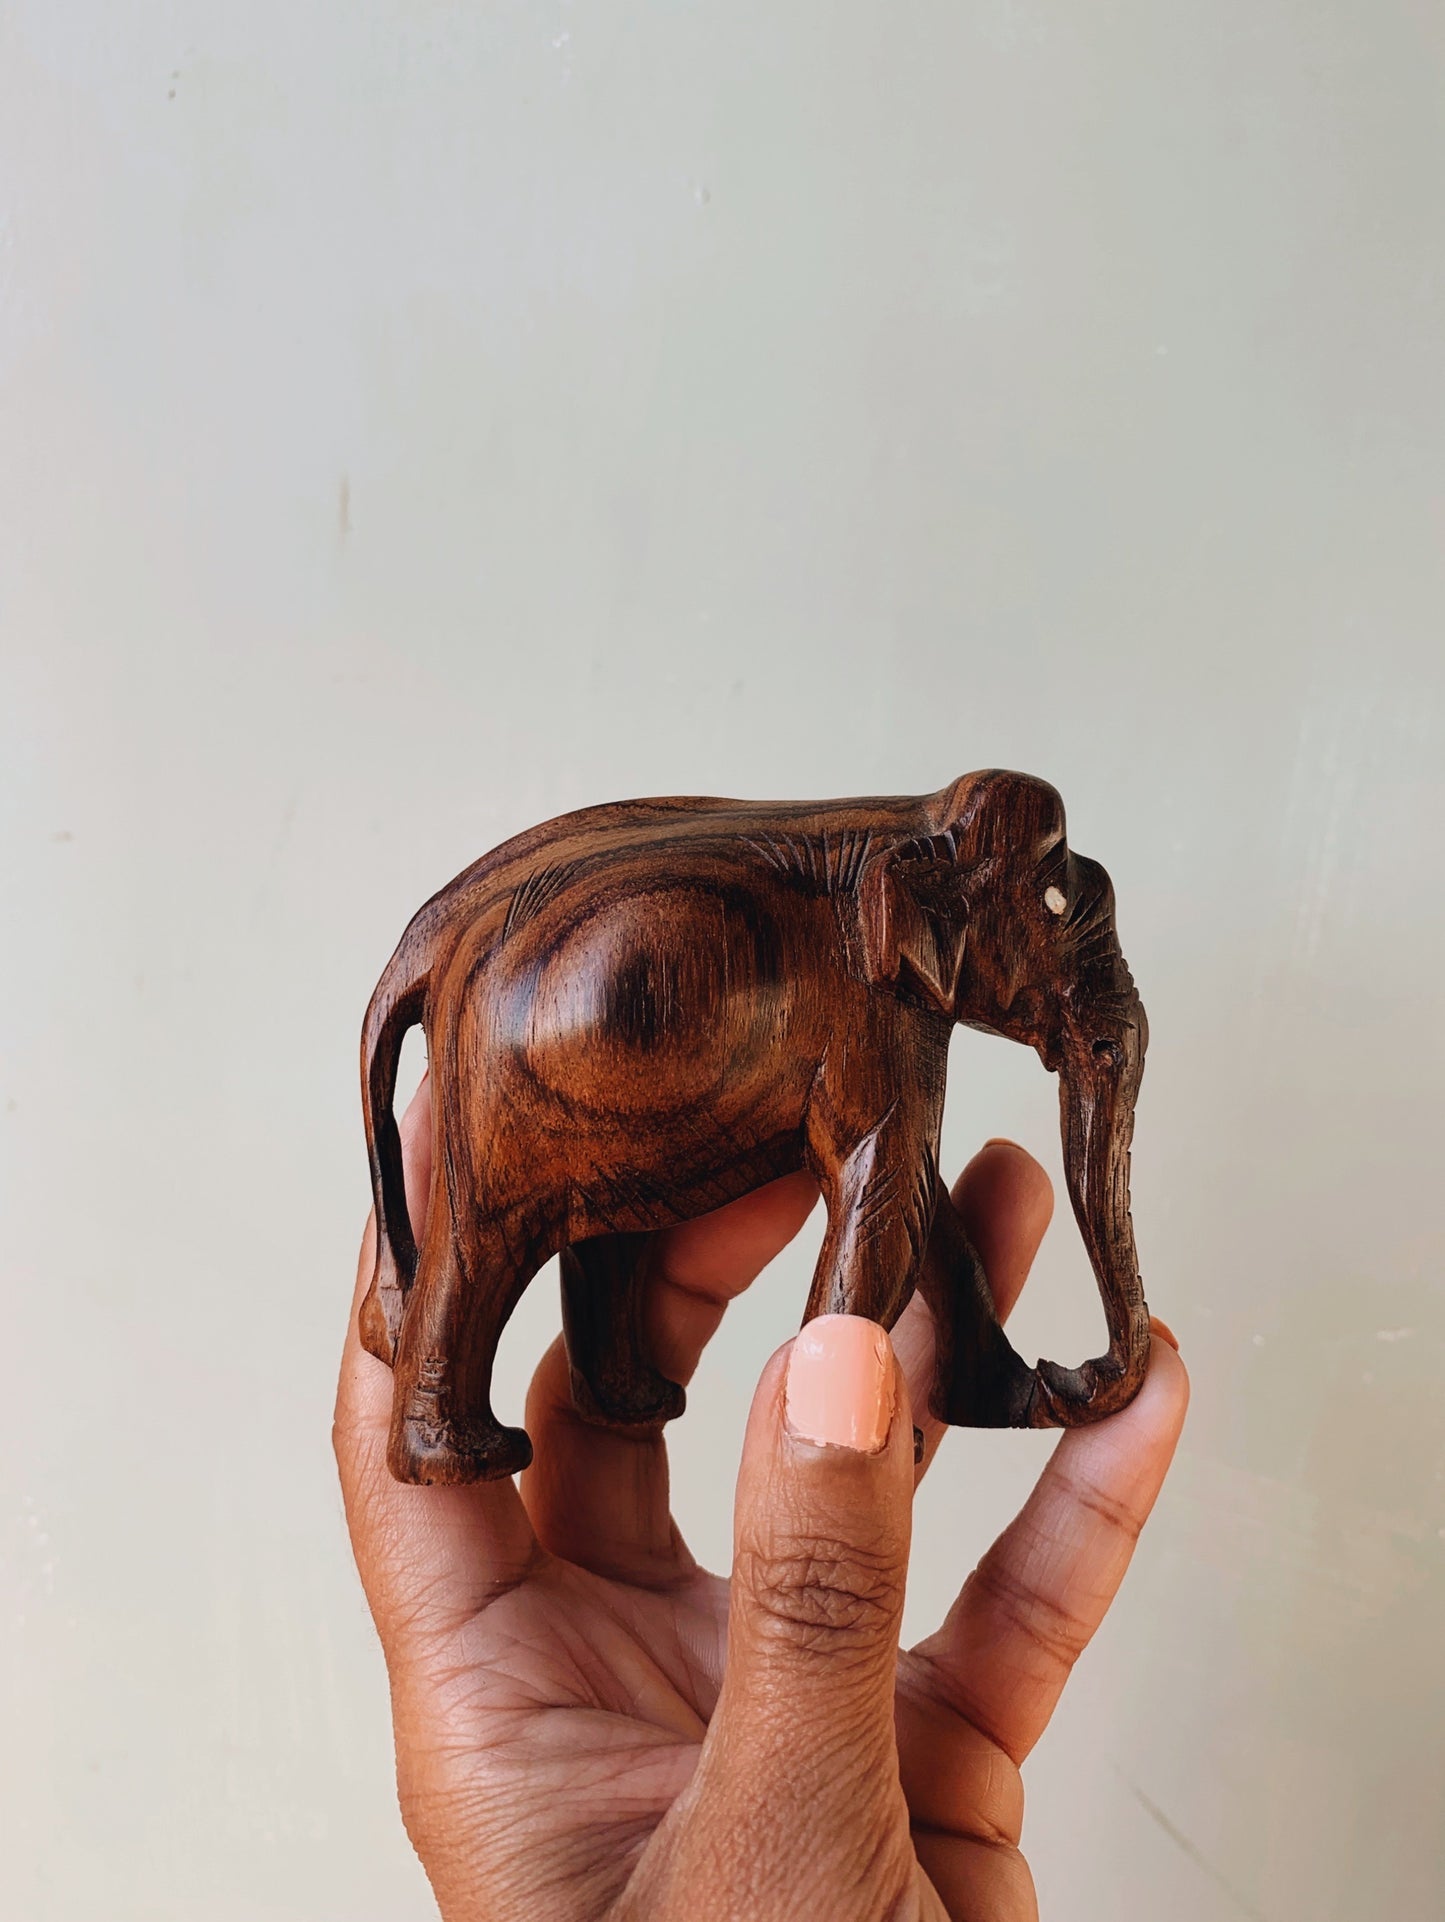 Rustic Hand~carved Wooden Elephant